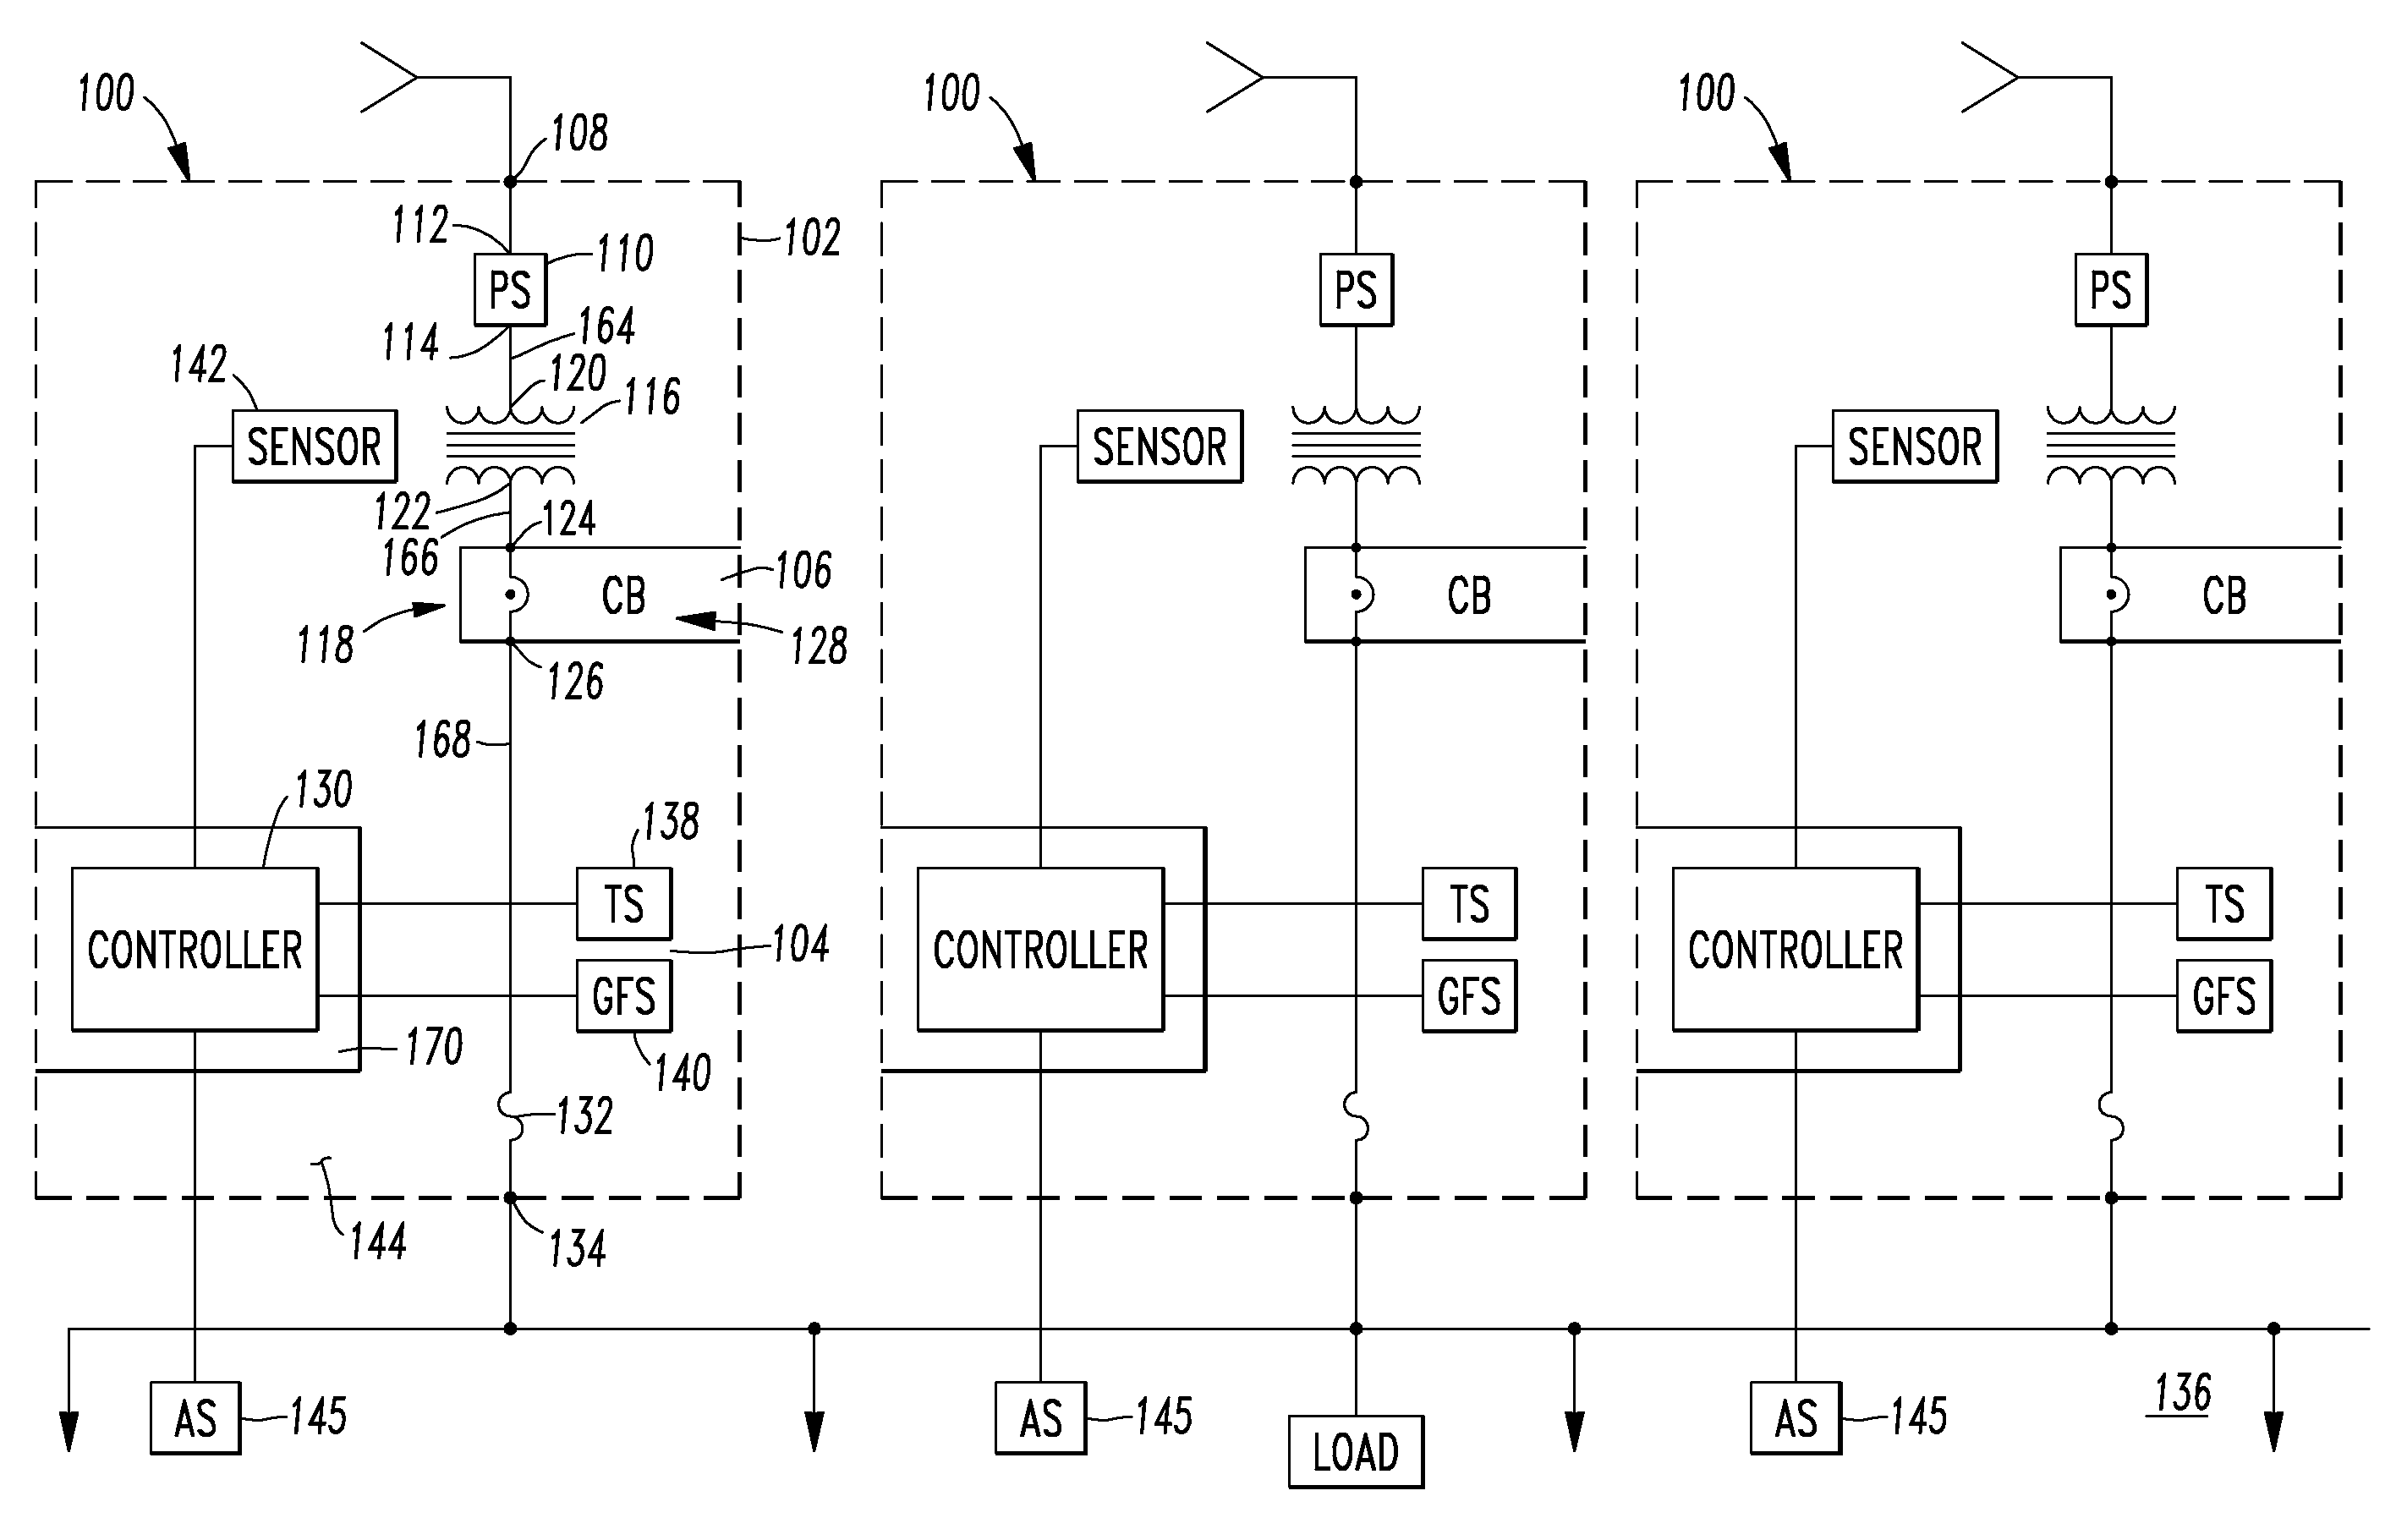 Network unit including network transformer and network protector